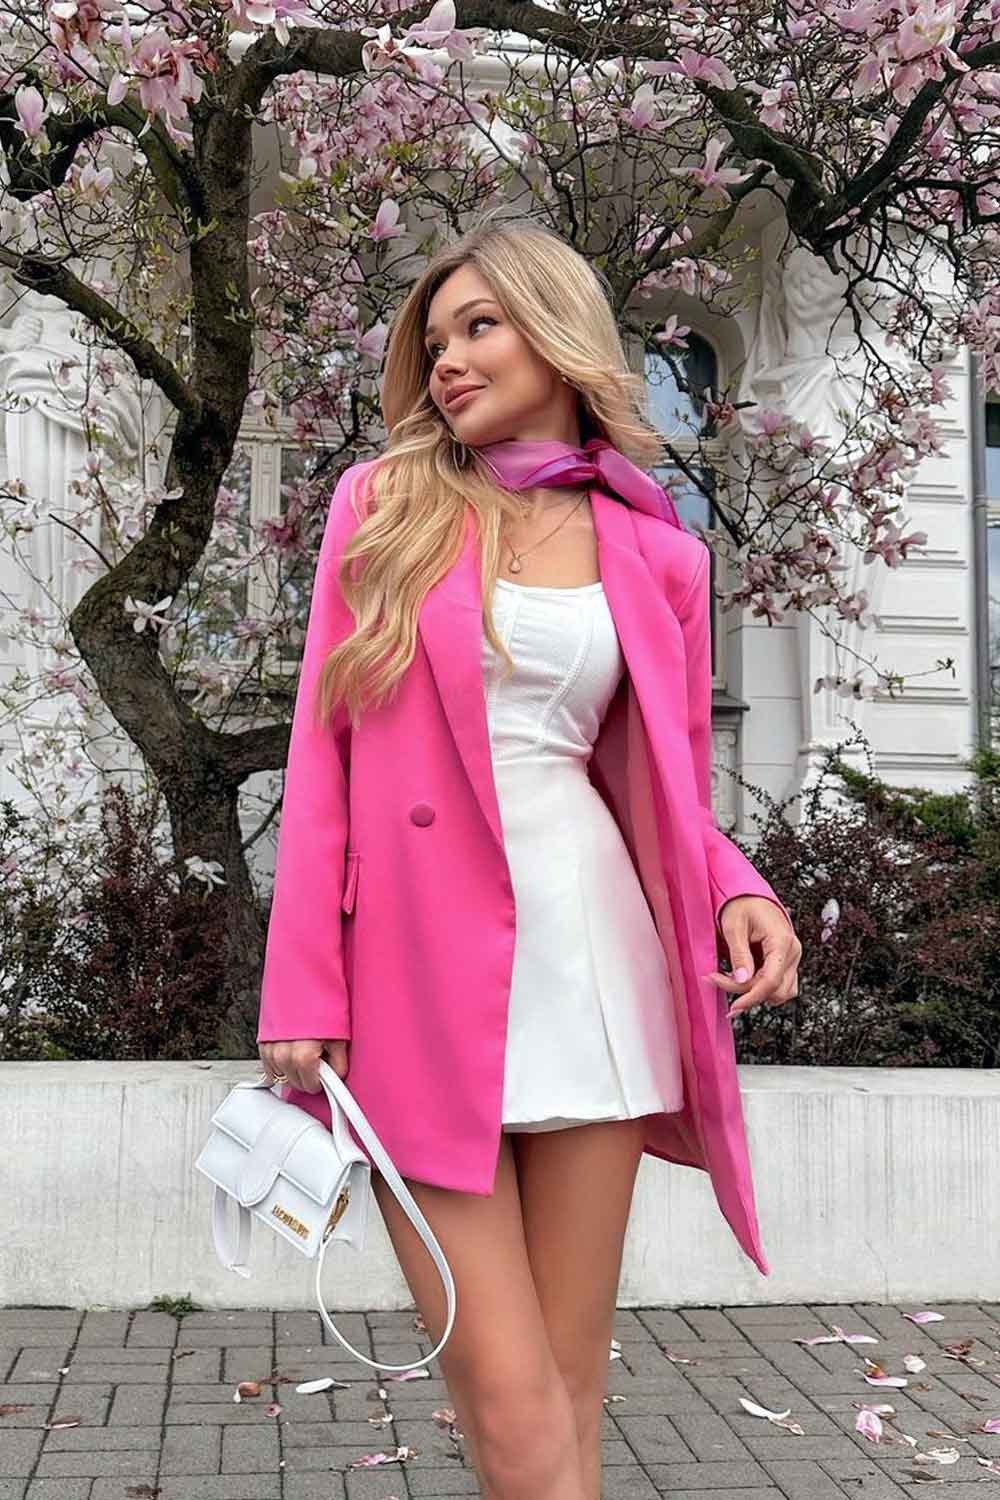 Barbie Look with White Dress and Pink Blazer